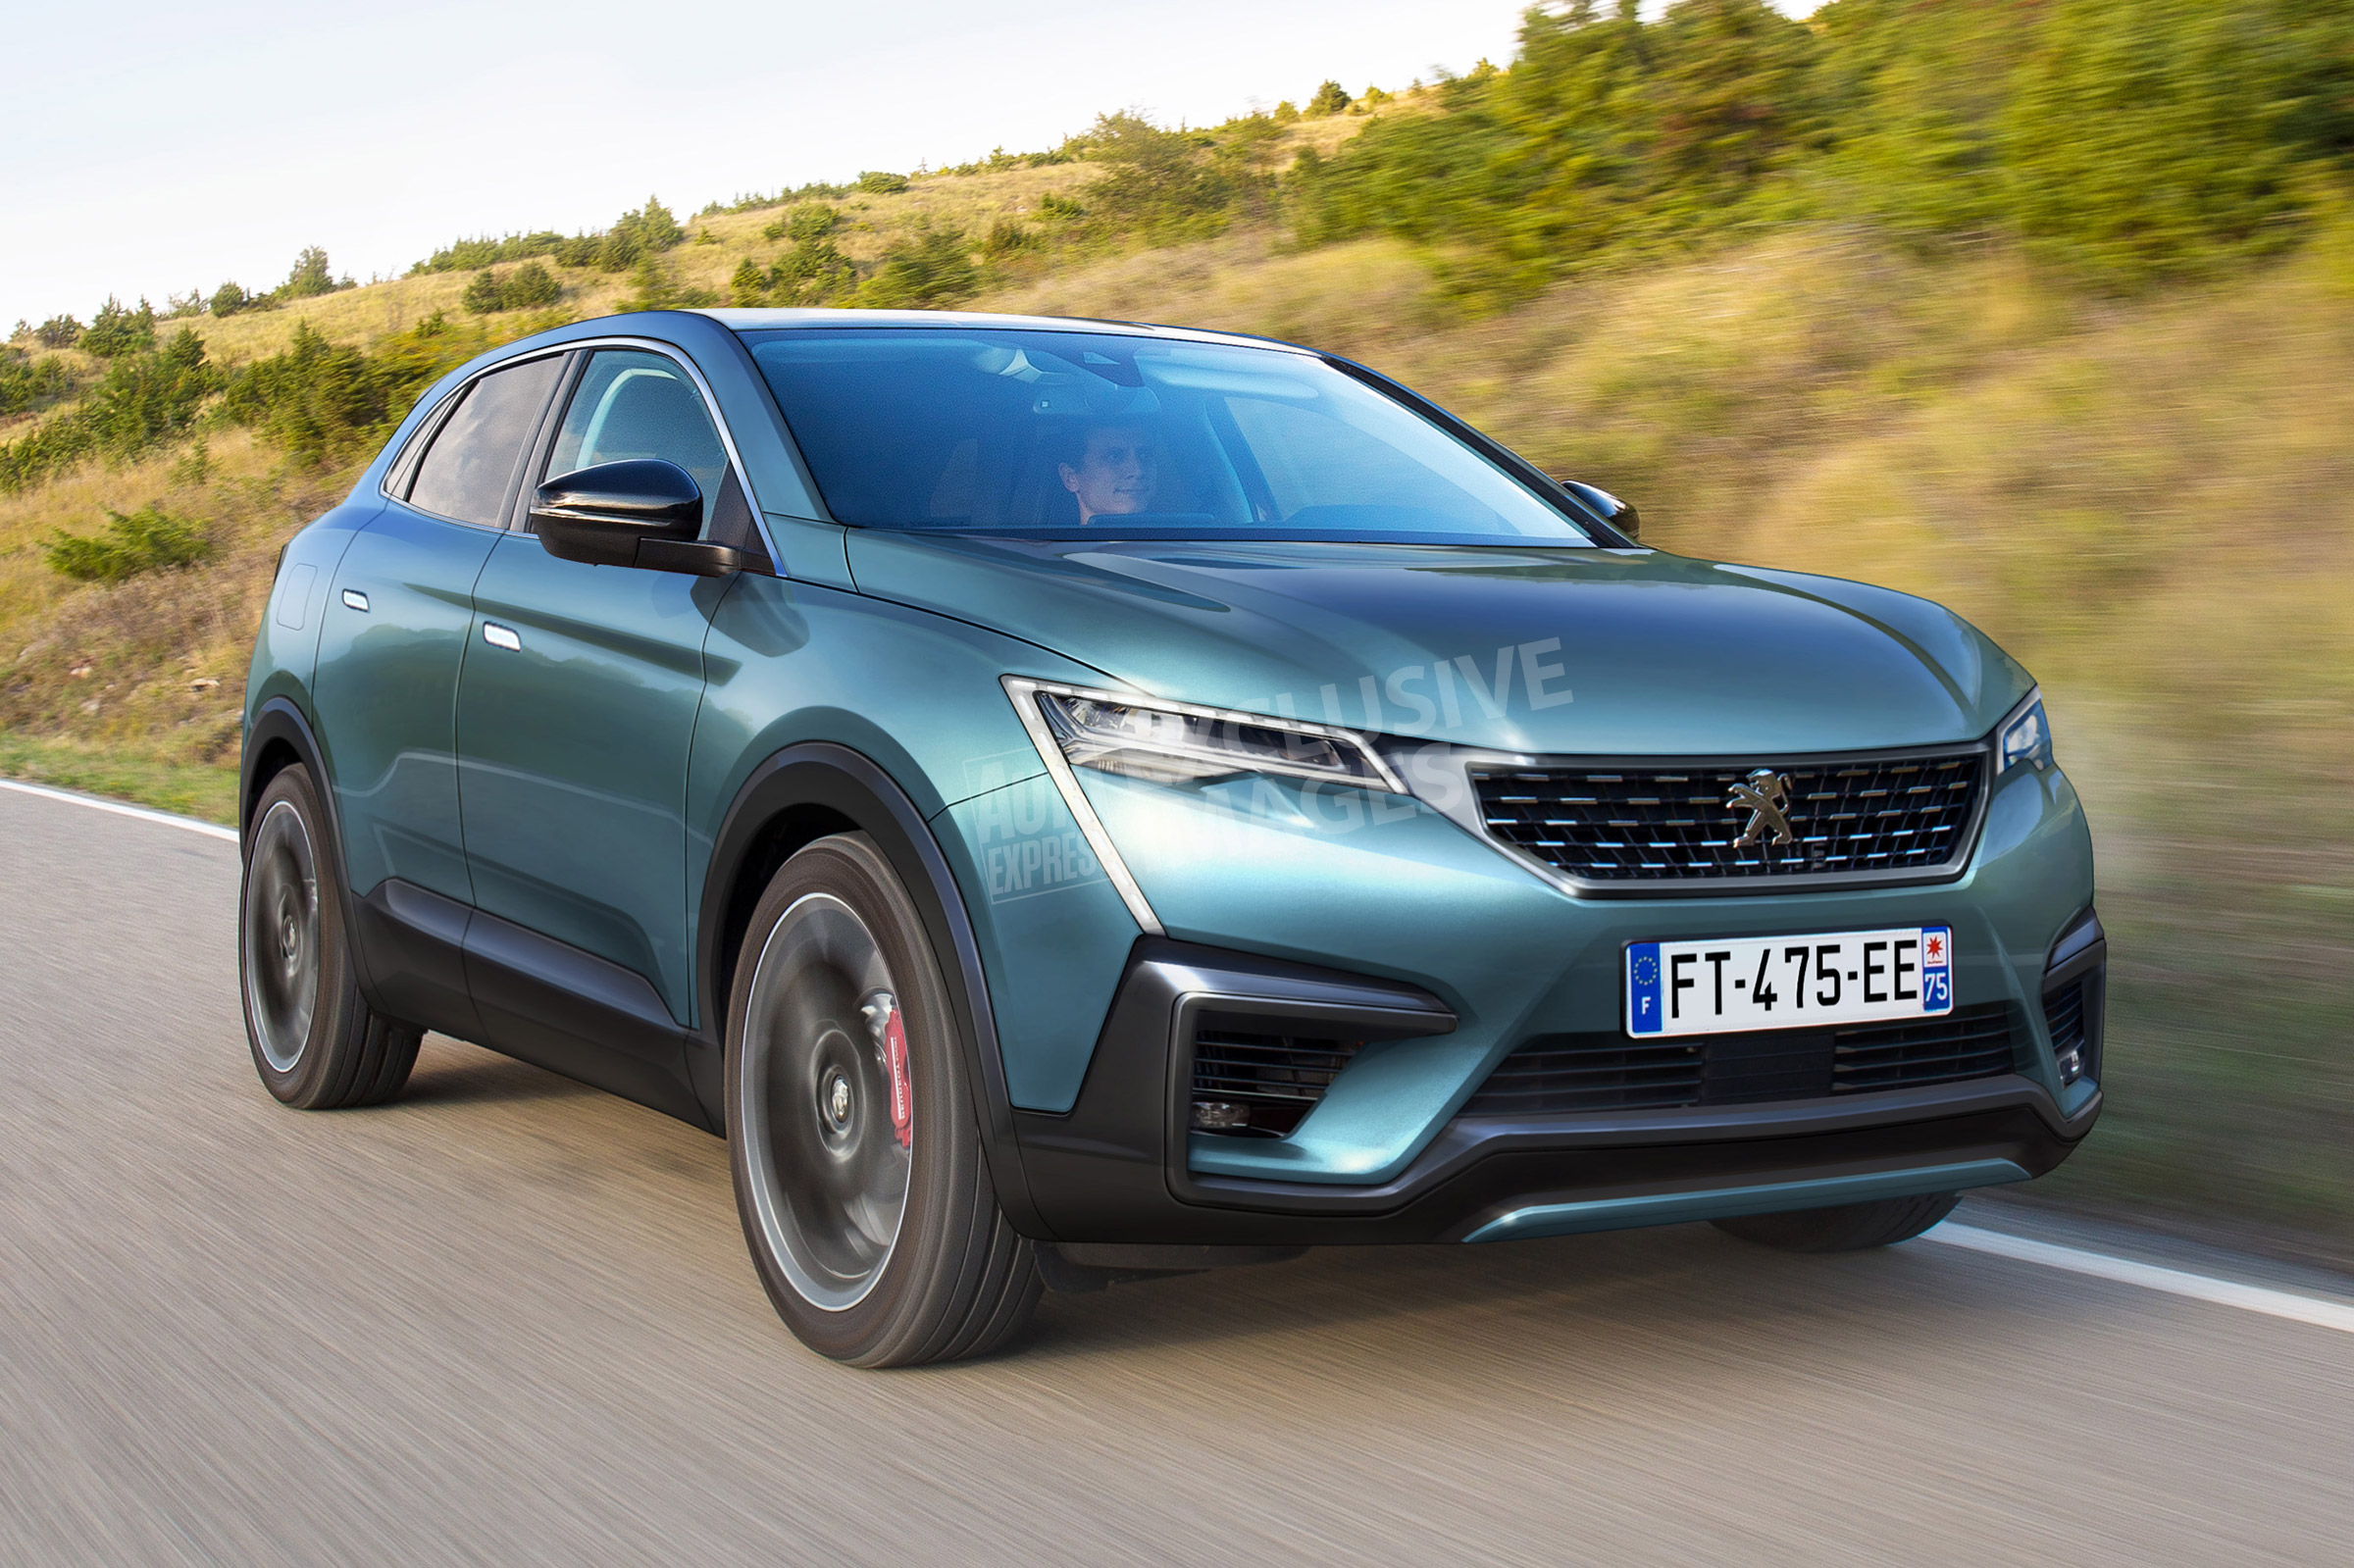 New Peugeot 4008 Coupe Suv Set To Arrive In 2020 Auto Express